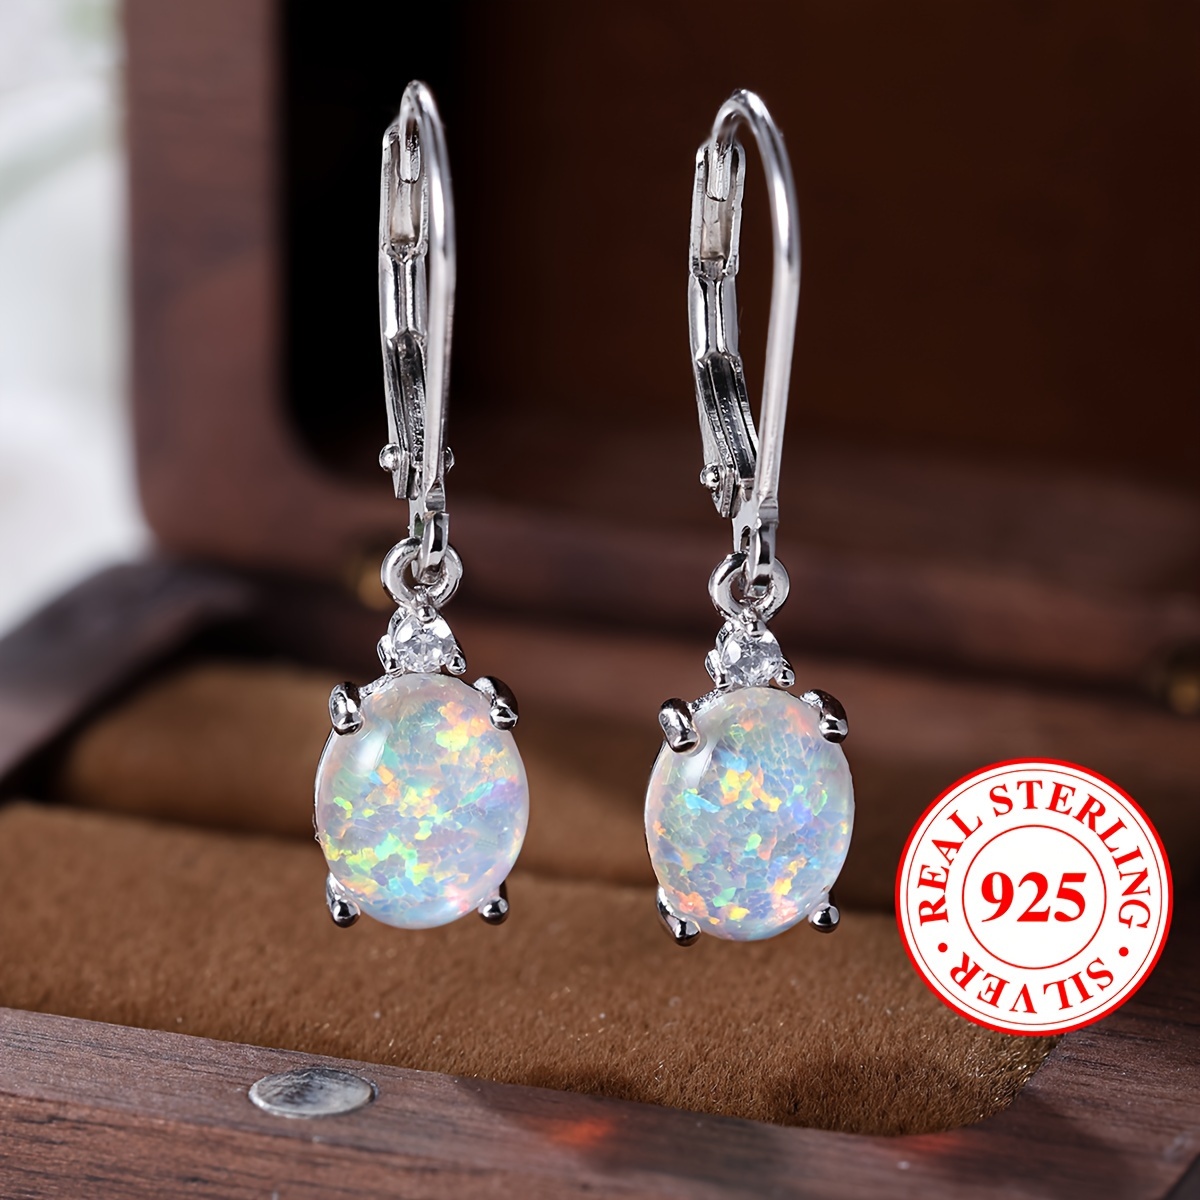 

925 Sterling Silver Dangle Earrings Inlaid Opal In Egg Shape Multi Colors For U To Choose Match Daily Outfits Party Decor High Quality Jewelry